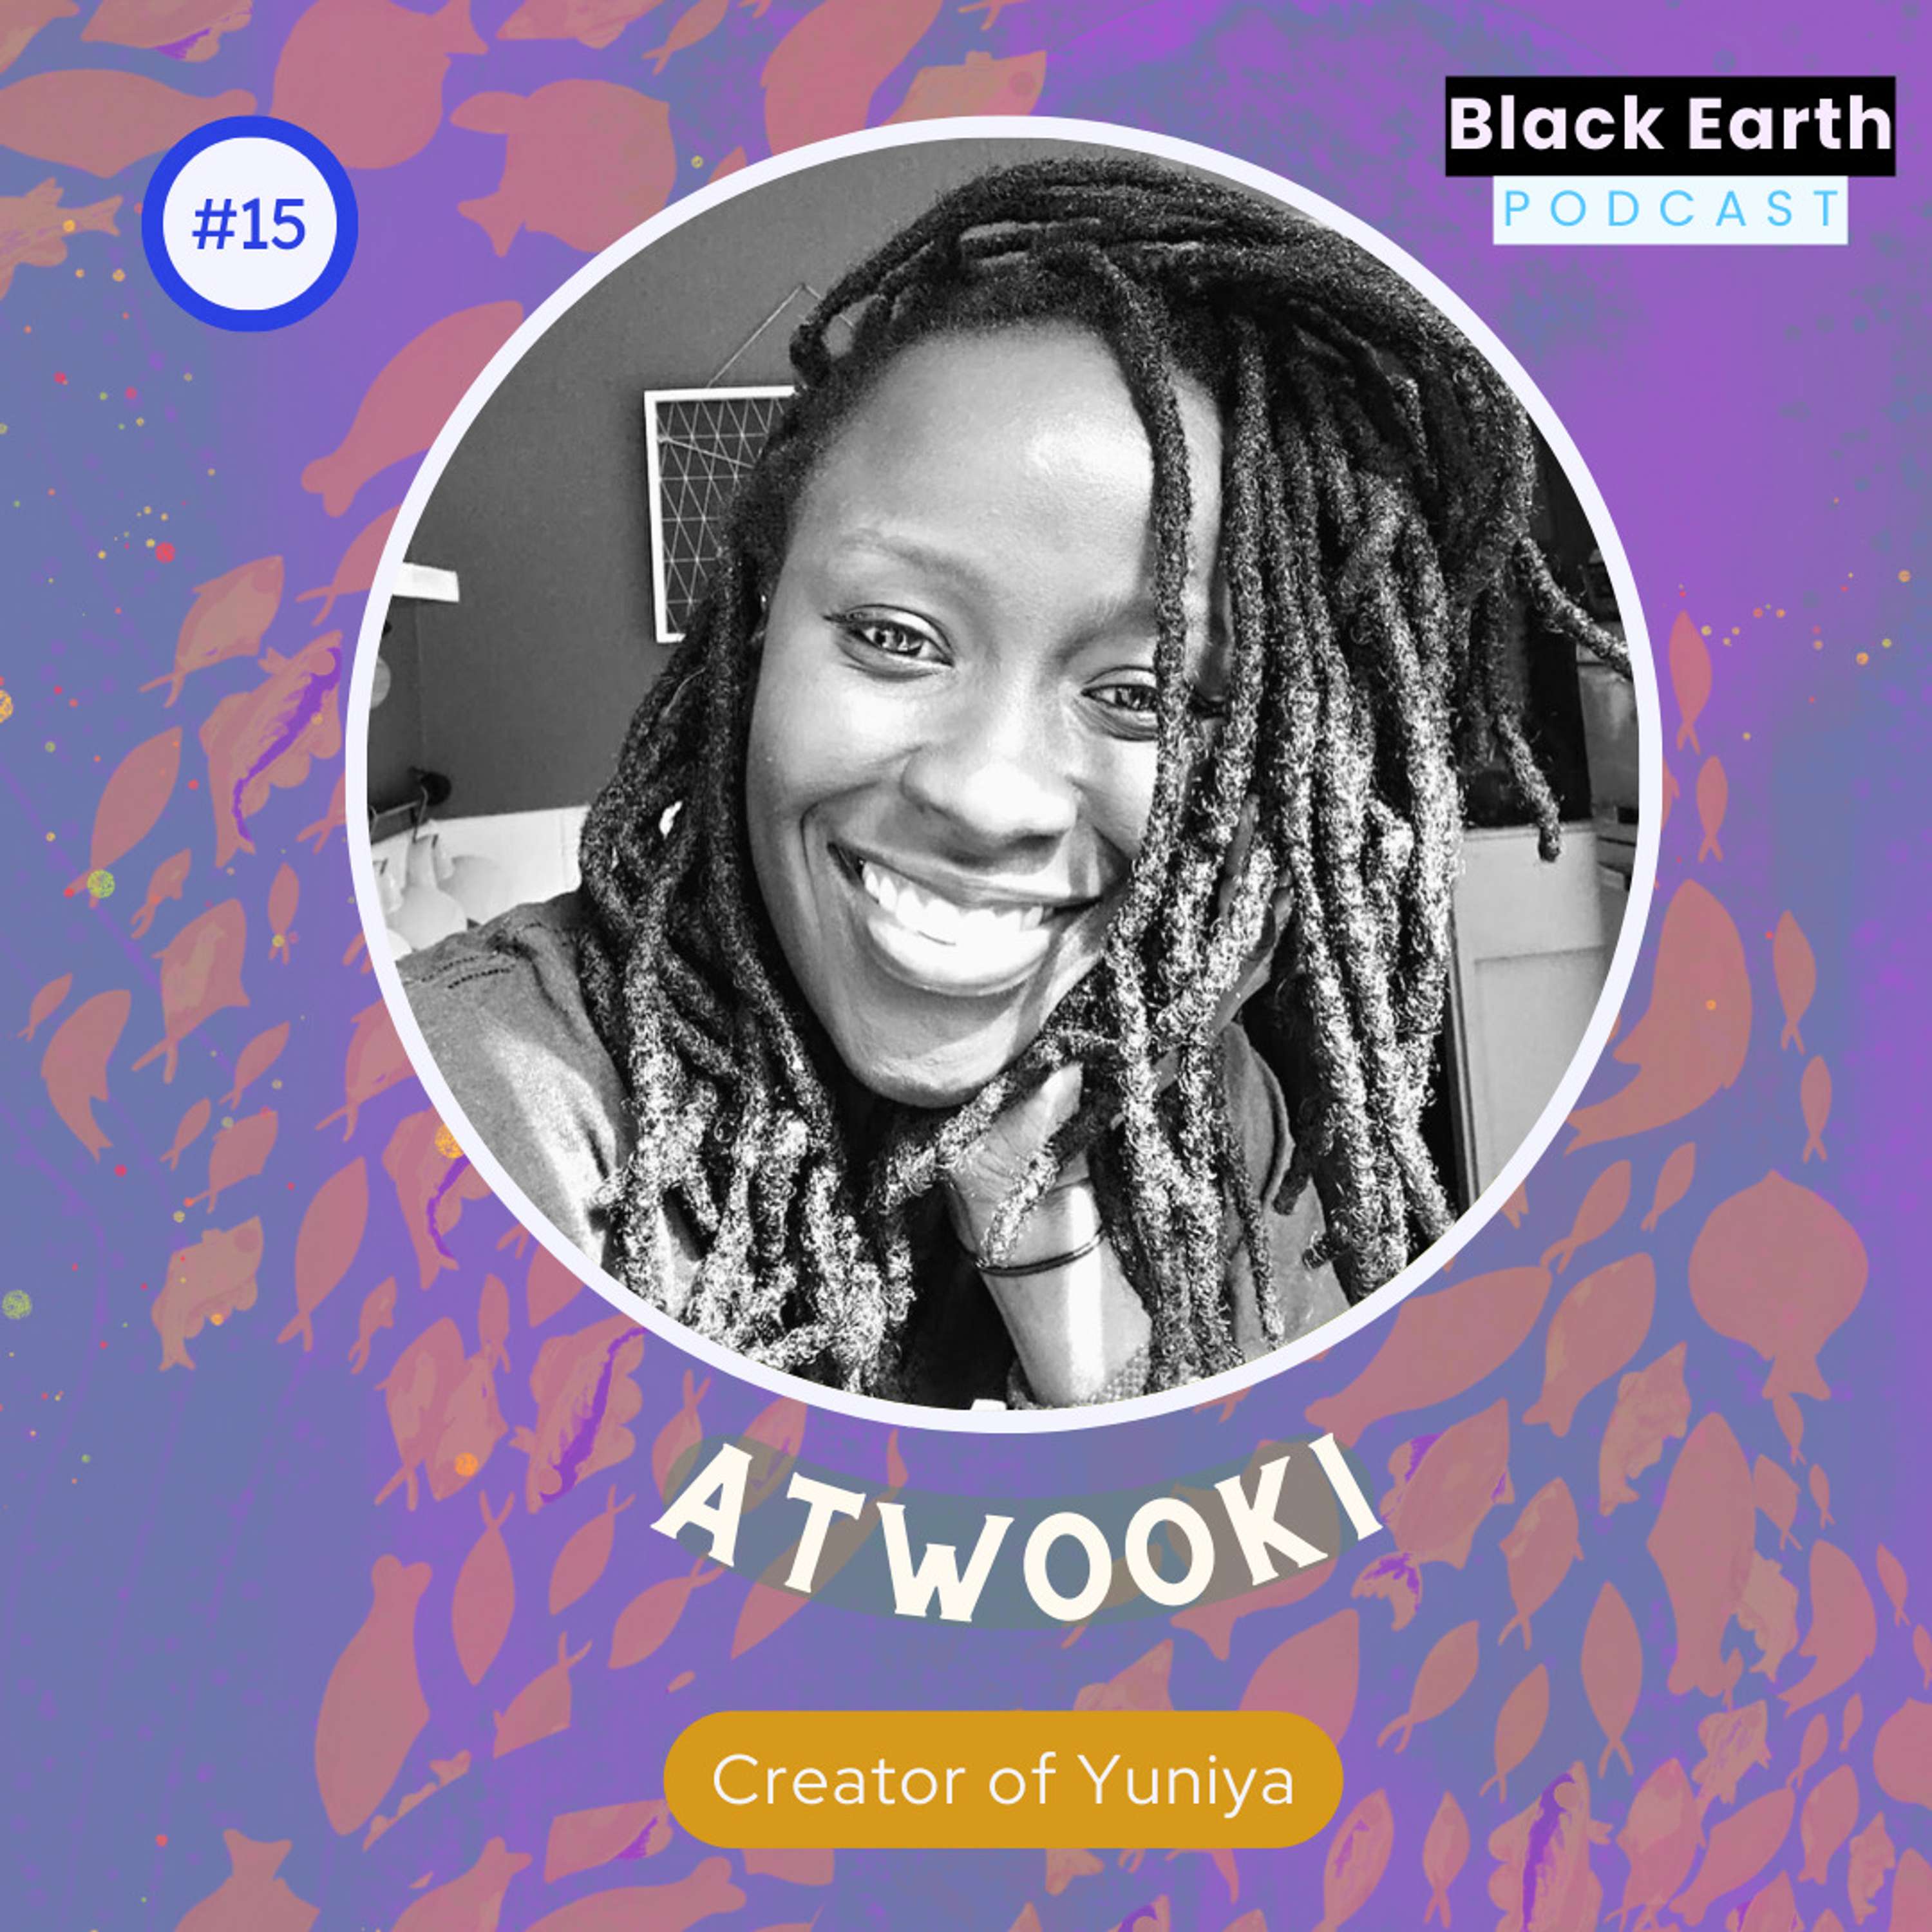 How African mythology is changing the environmental movement with Atwooki